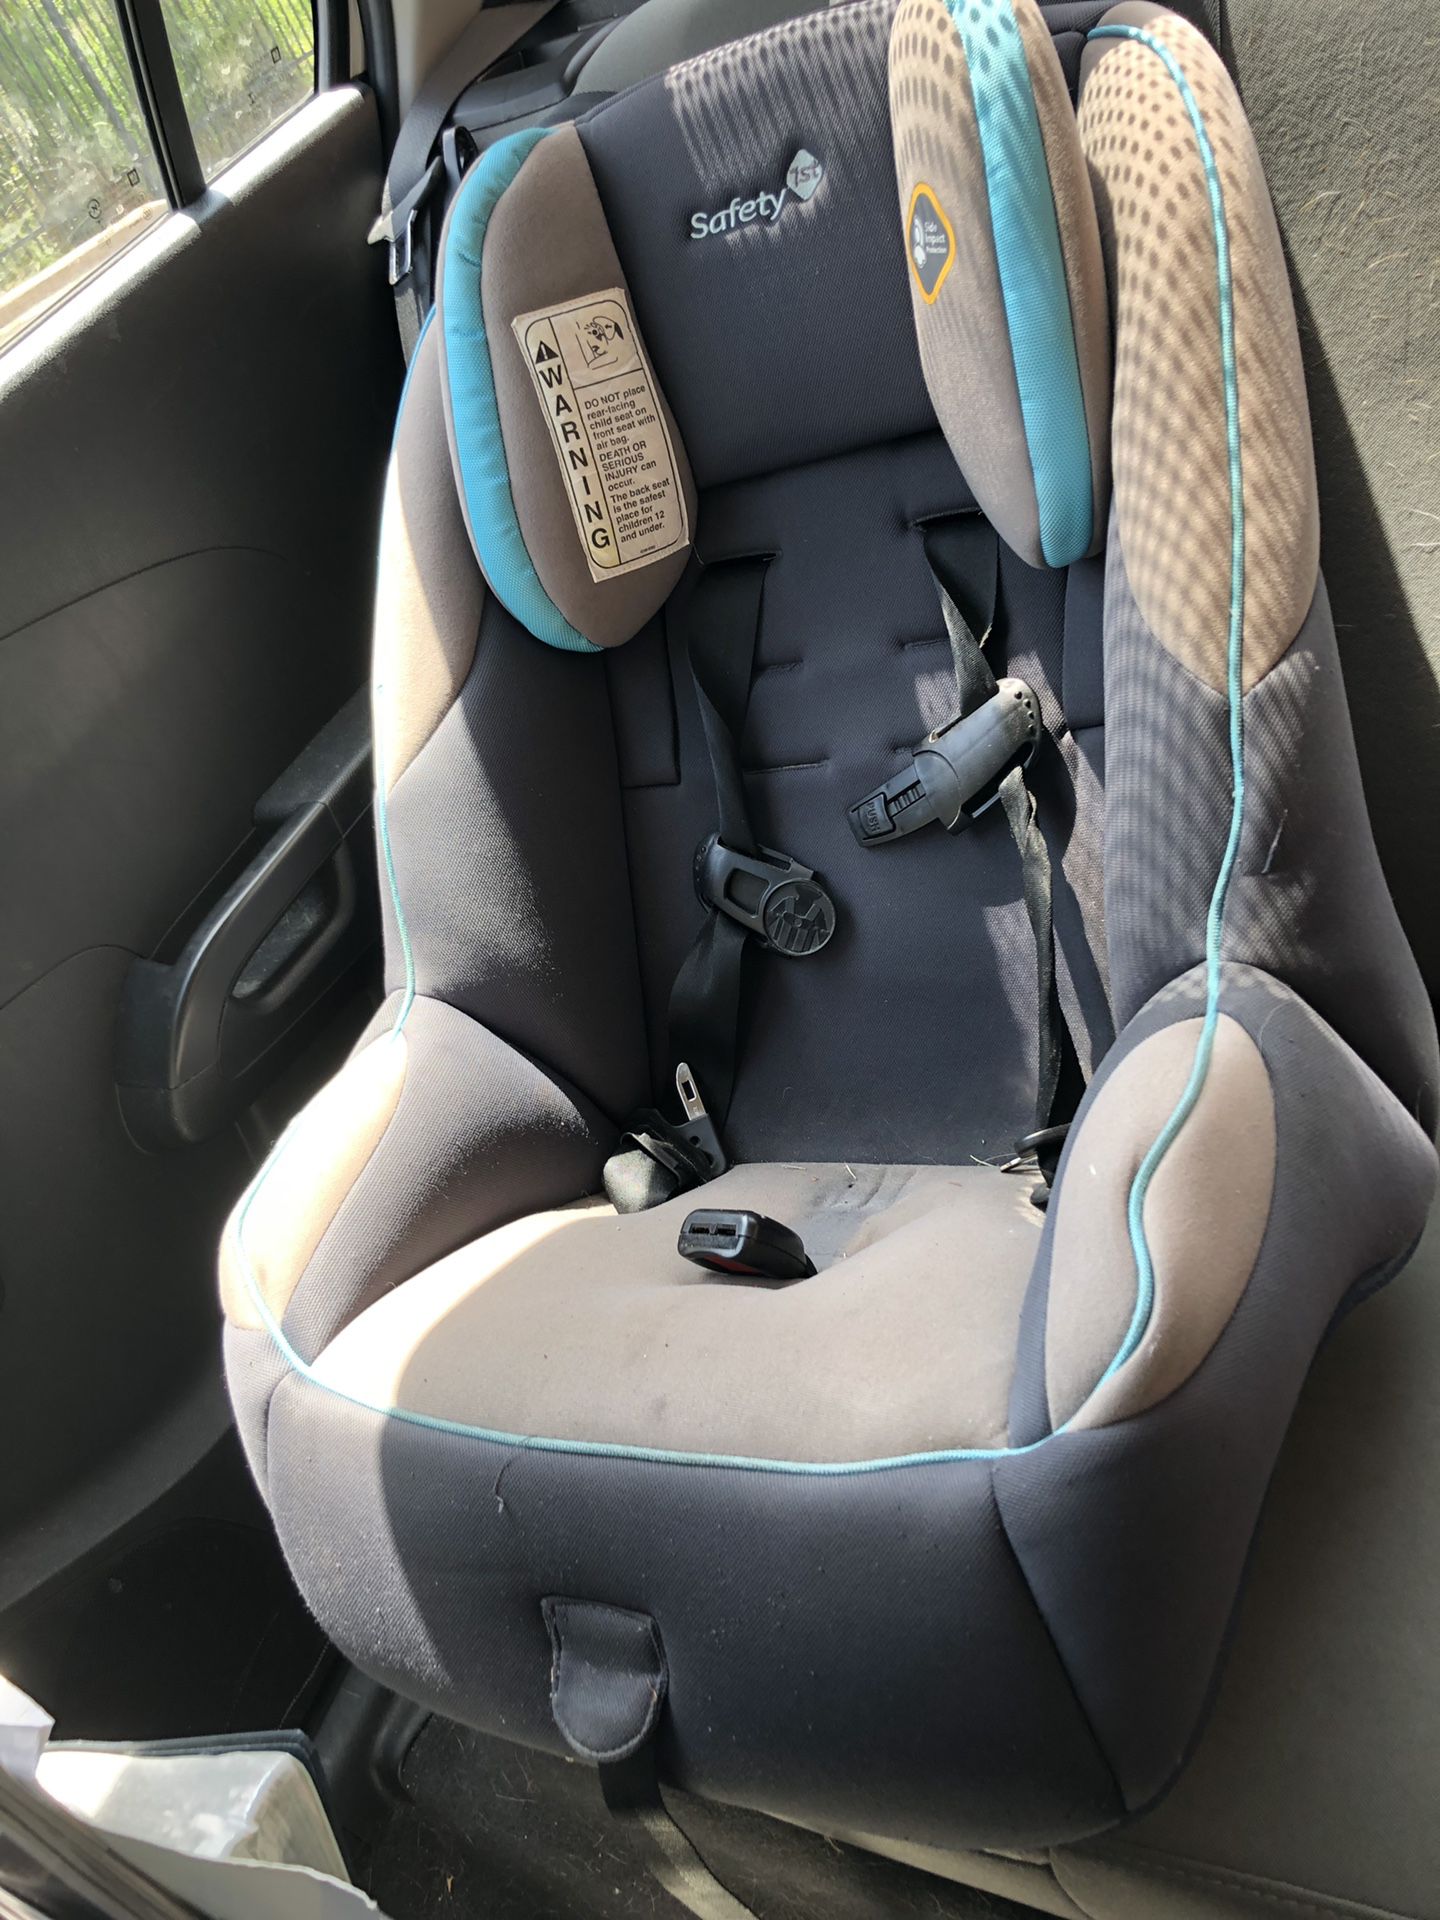 SAFETY 1st GROW AND GO CAR SEAT